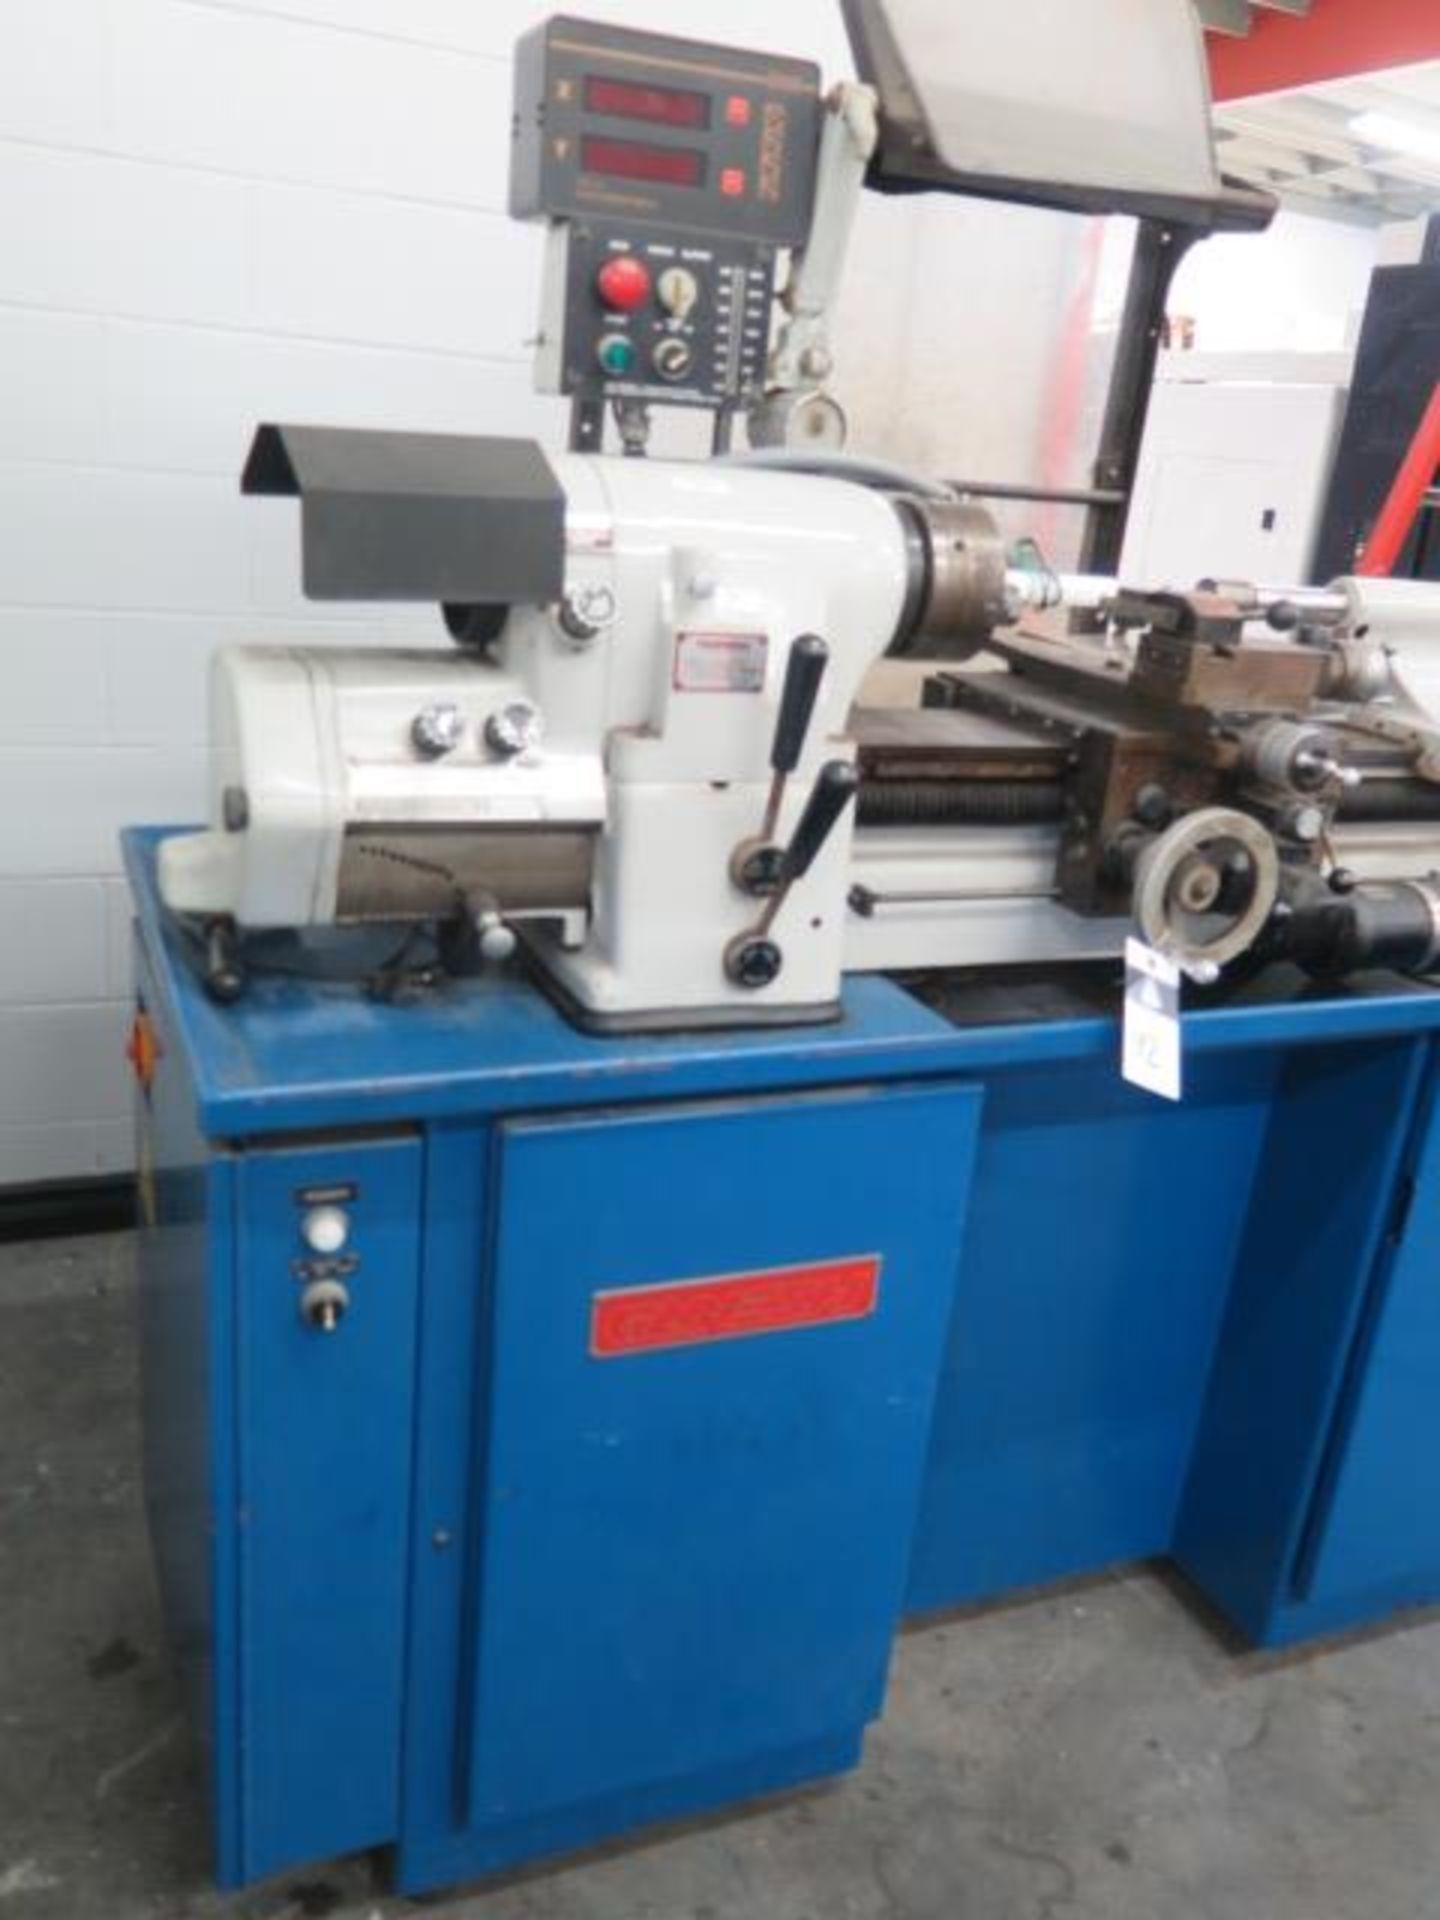 1998 Ganesh HCL-618SP Tool Room Lathe s/n 7510 w/ DRO, 135-2955 Adjustable RPM, Inch/mm, Sold AS IS - Image 3 of 23